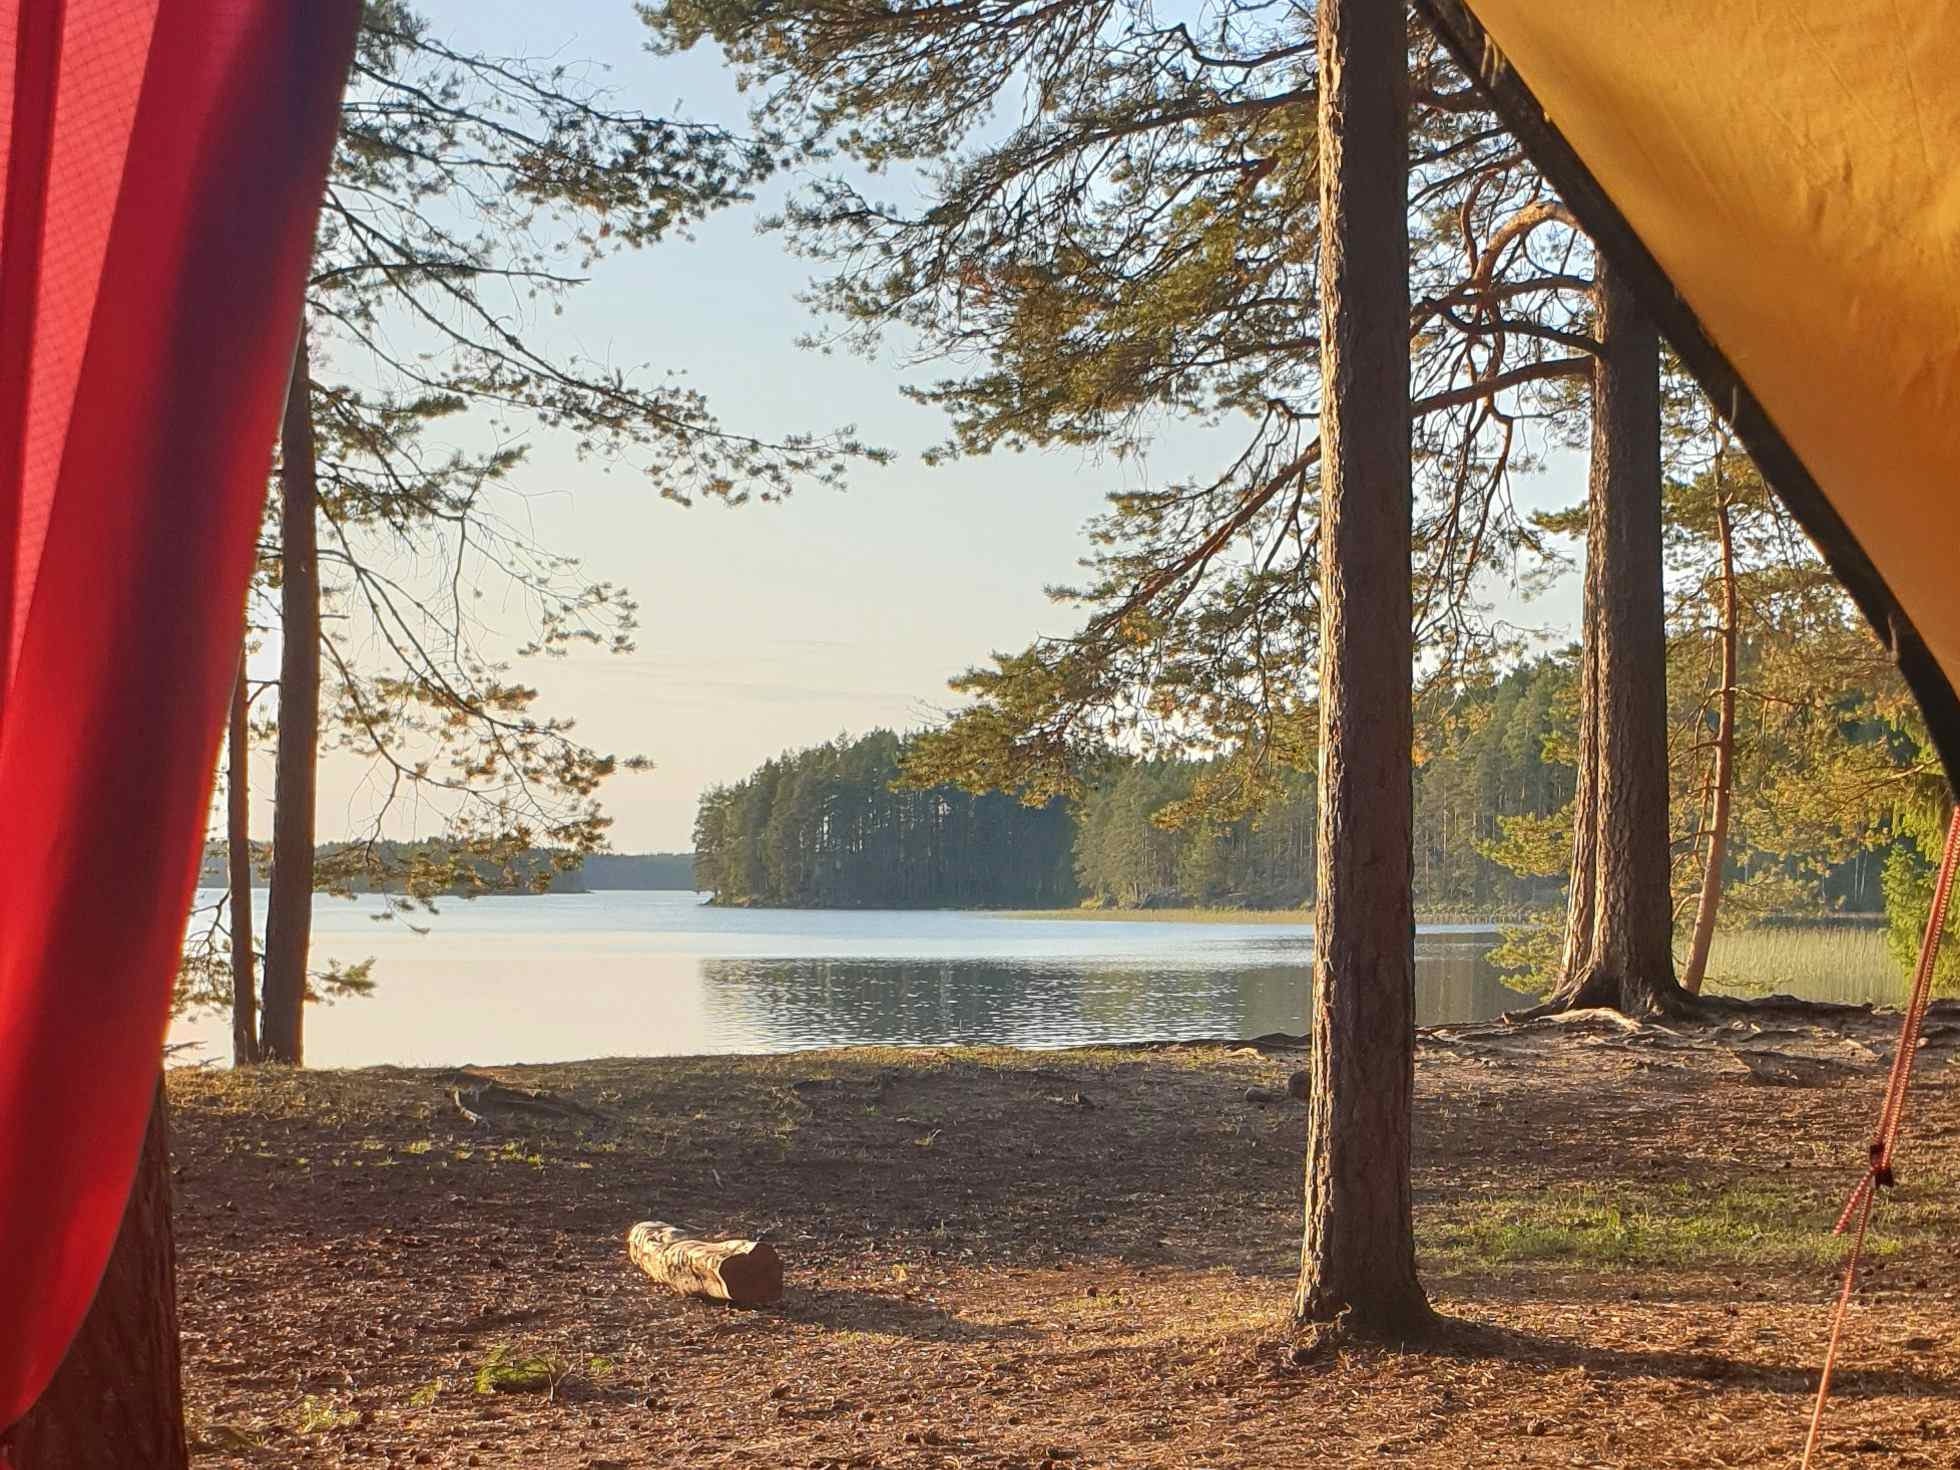 View from the tent in Finland. Packrafting and wild camping. Photo: Customer/Aine Halton-Hanley